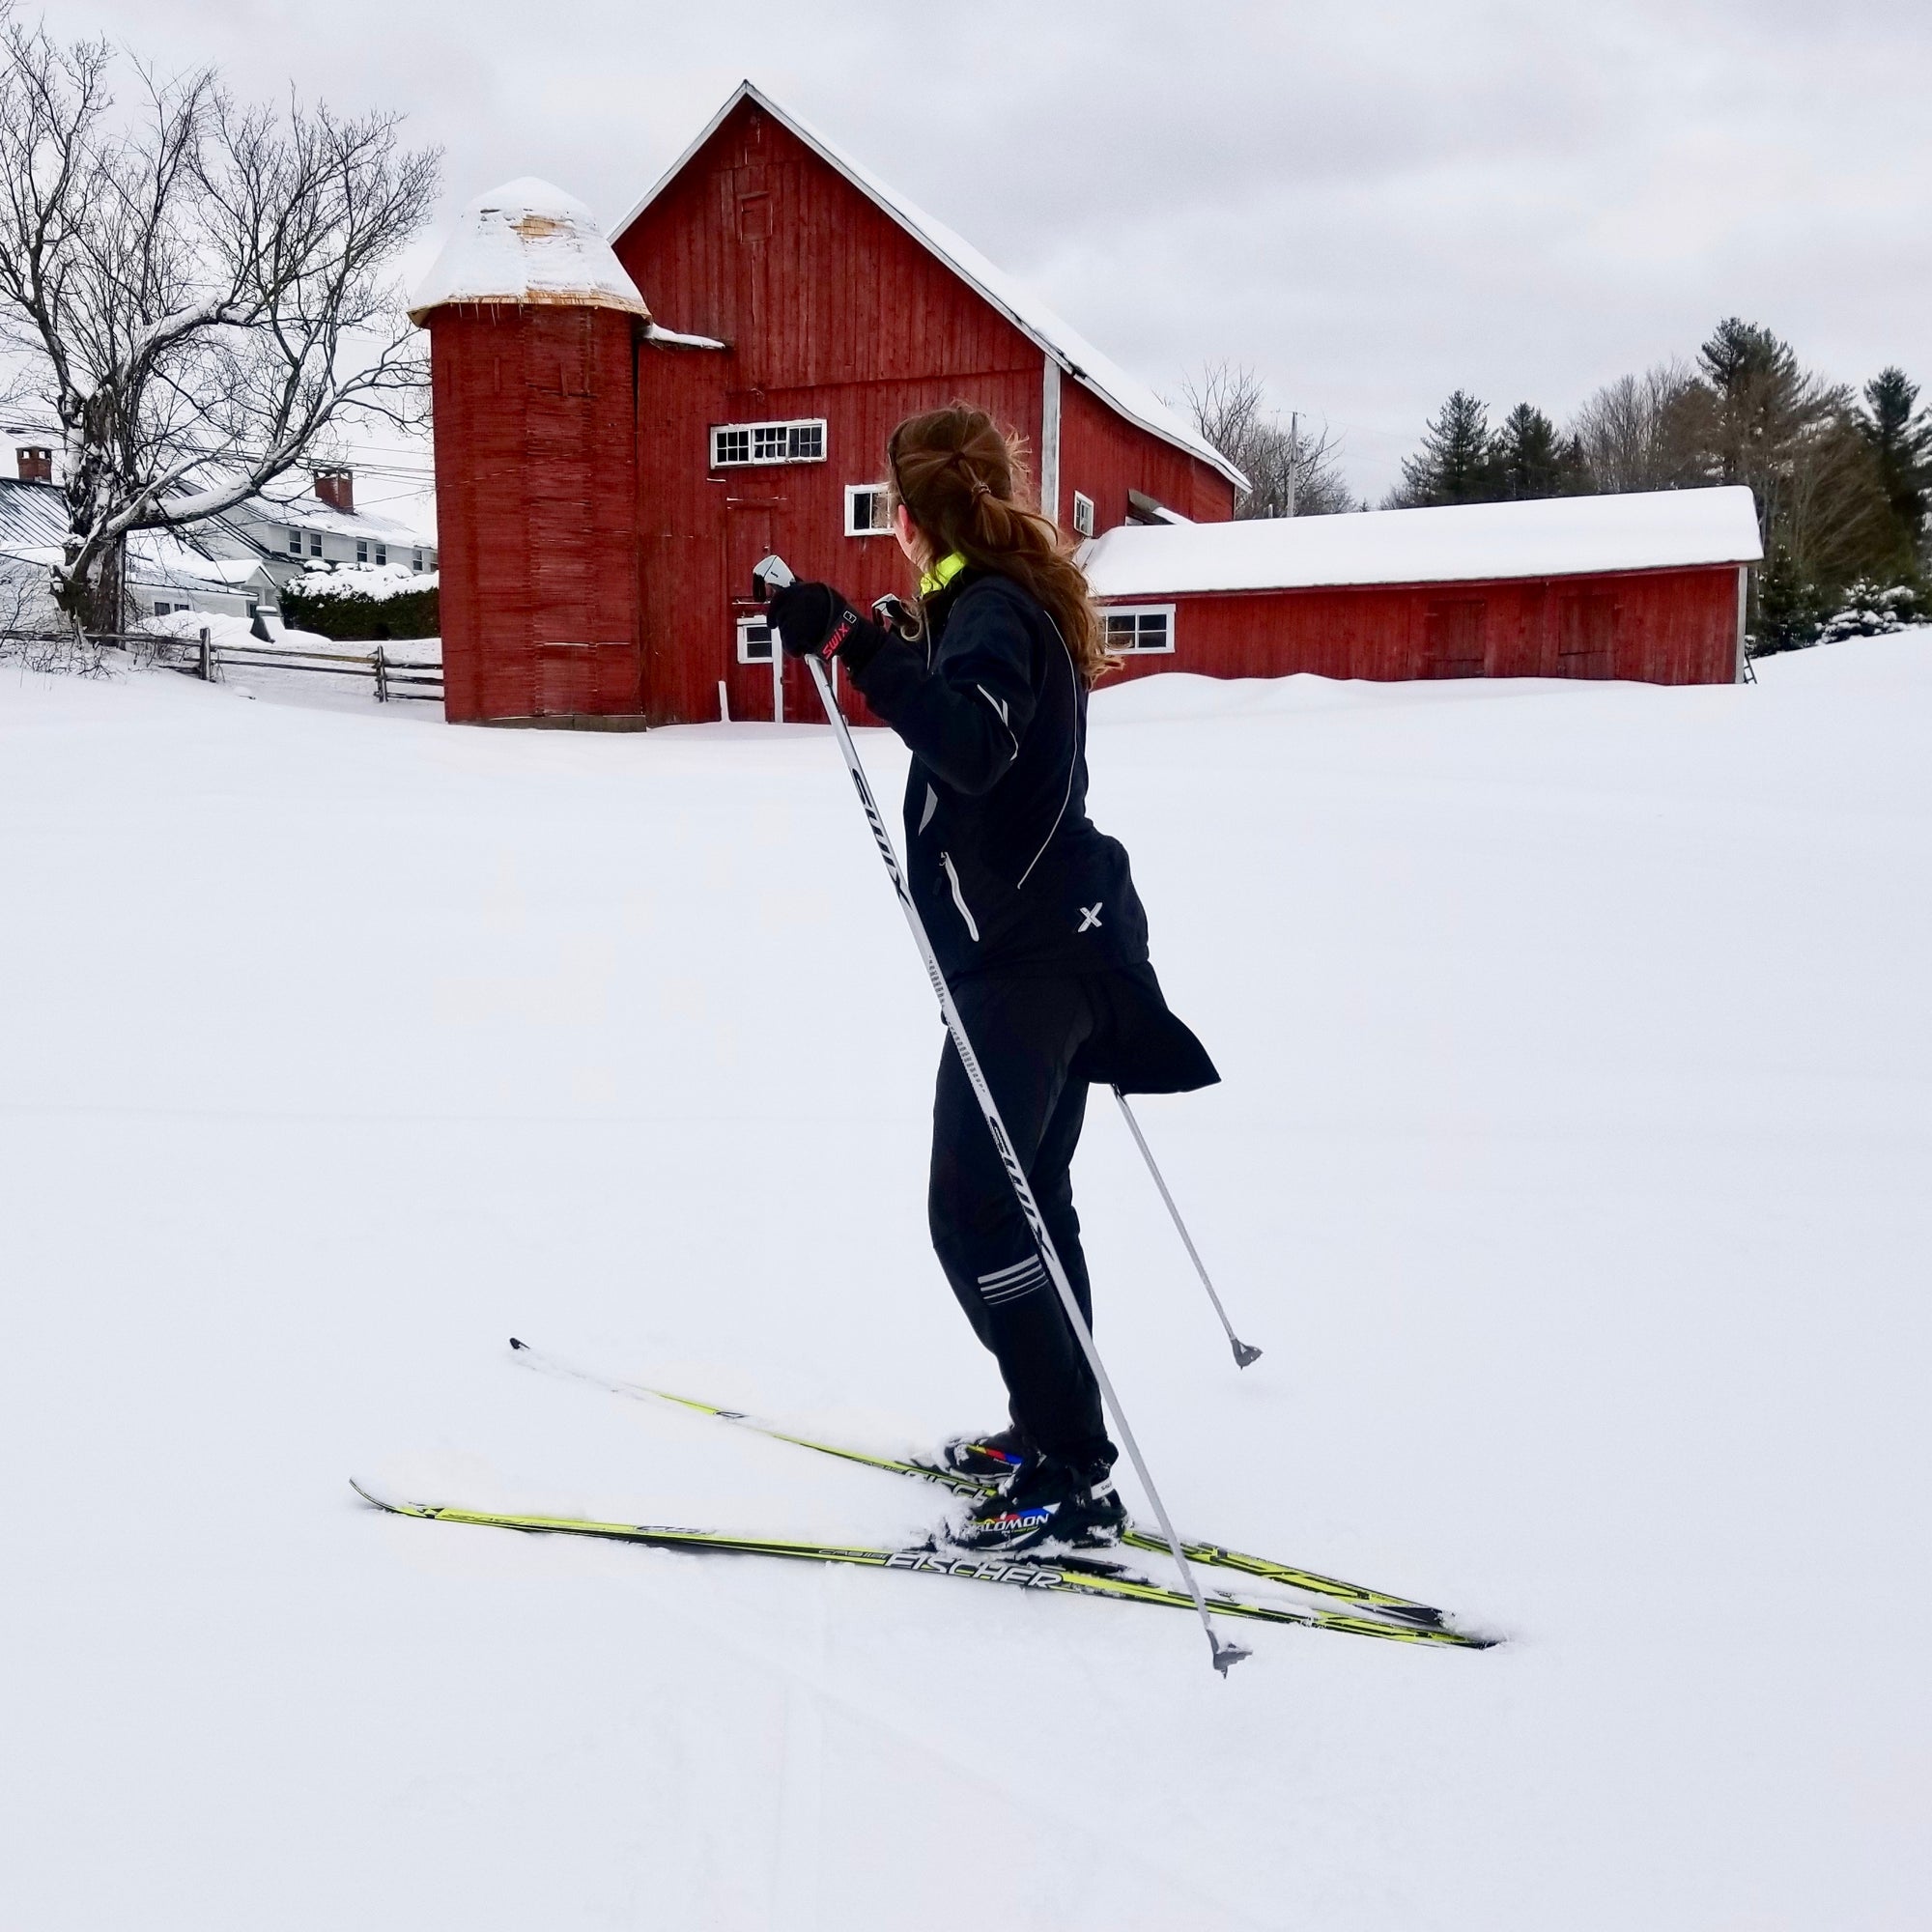 A cross country skier dressed in black with yellow skis looking at a red barn